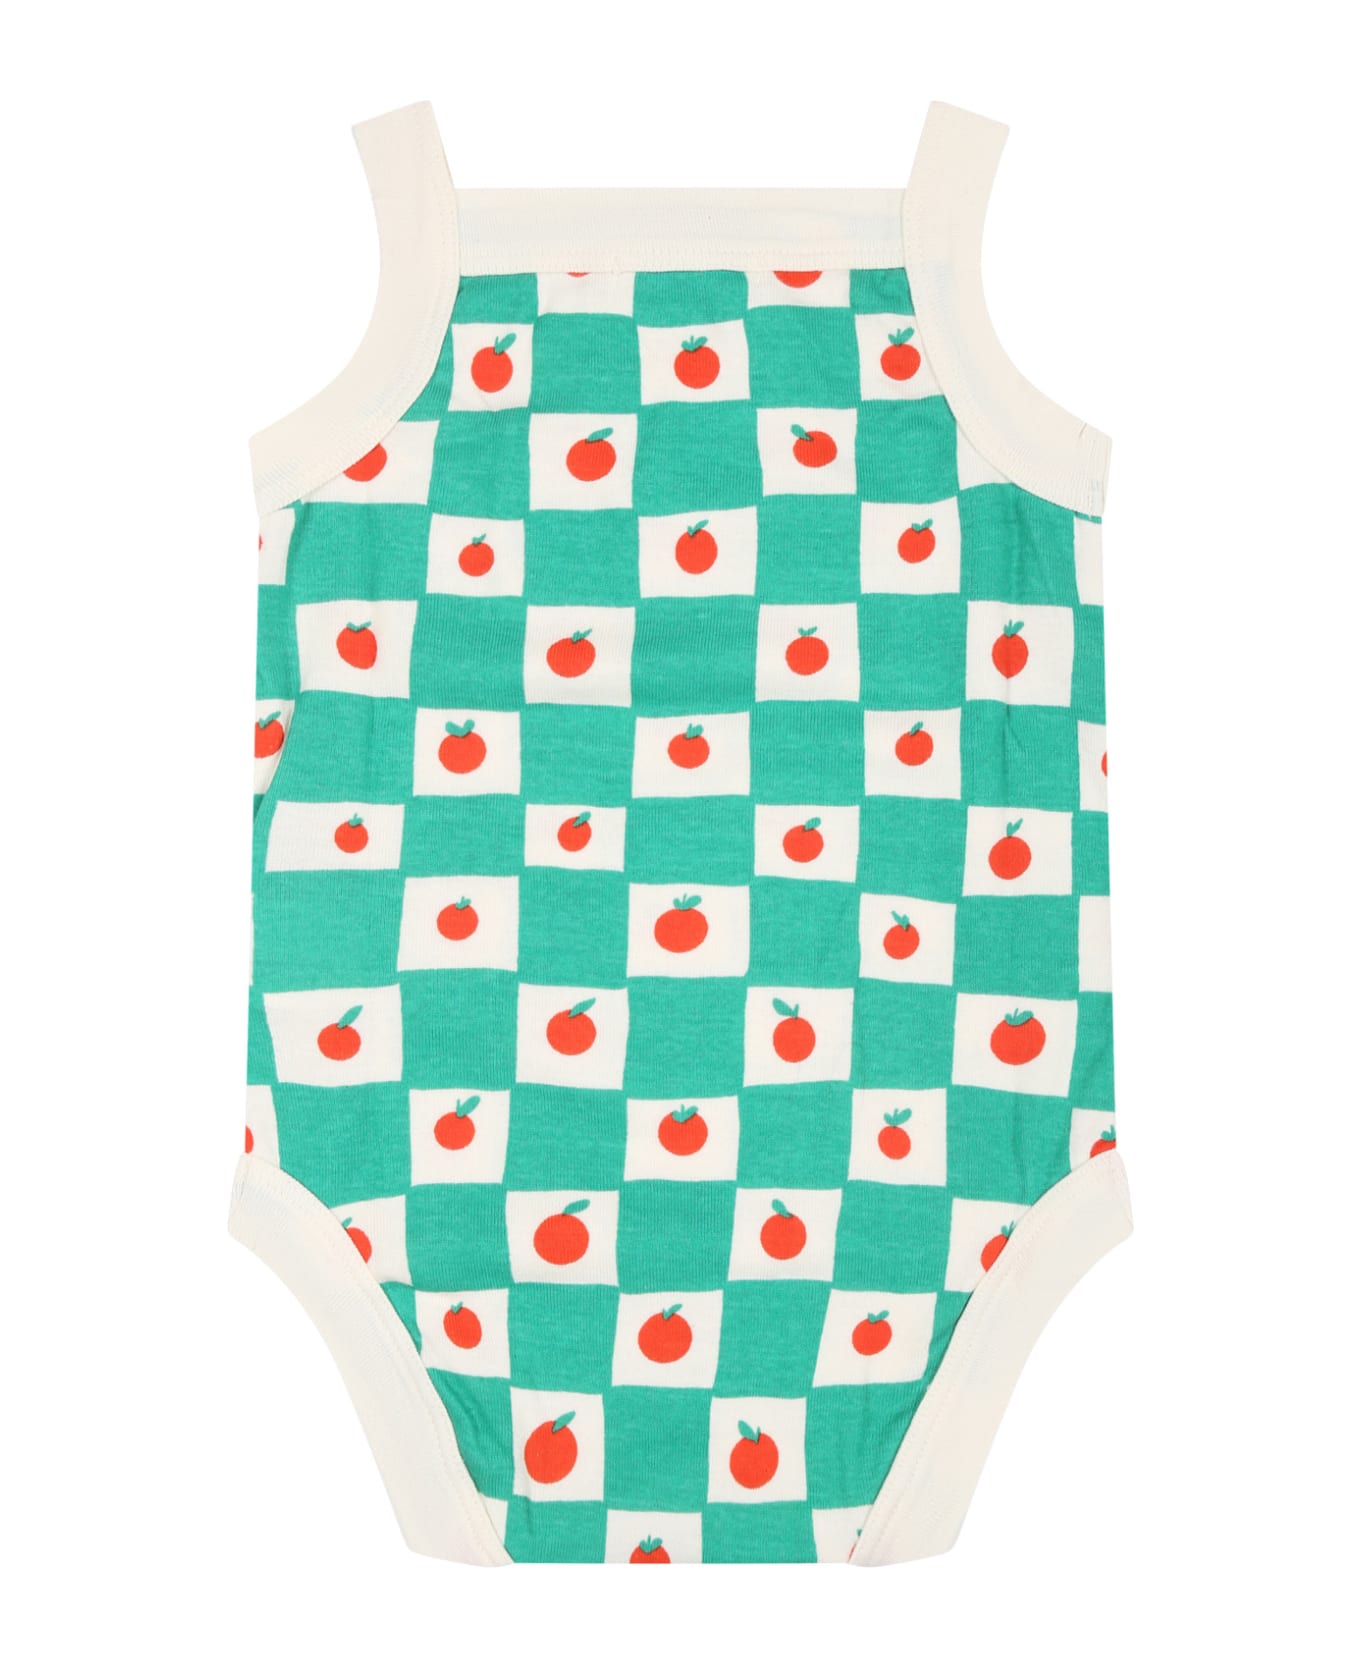 Bobo Choses Green Bodysuit For Babykids With Tomatoes - Green